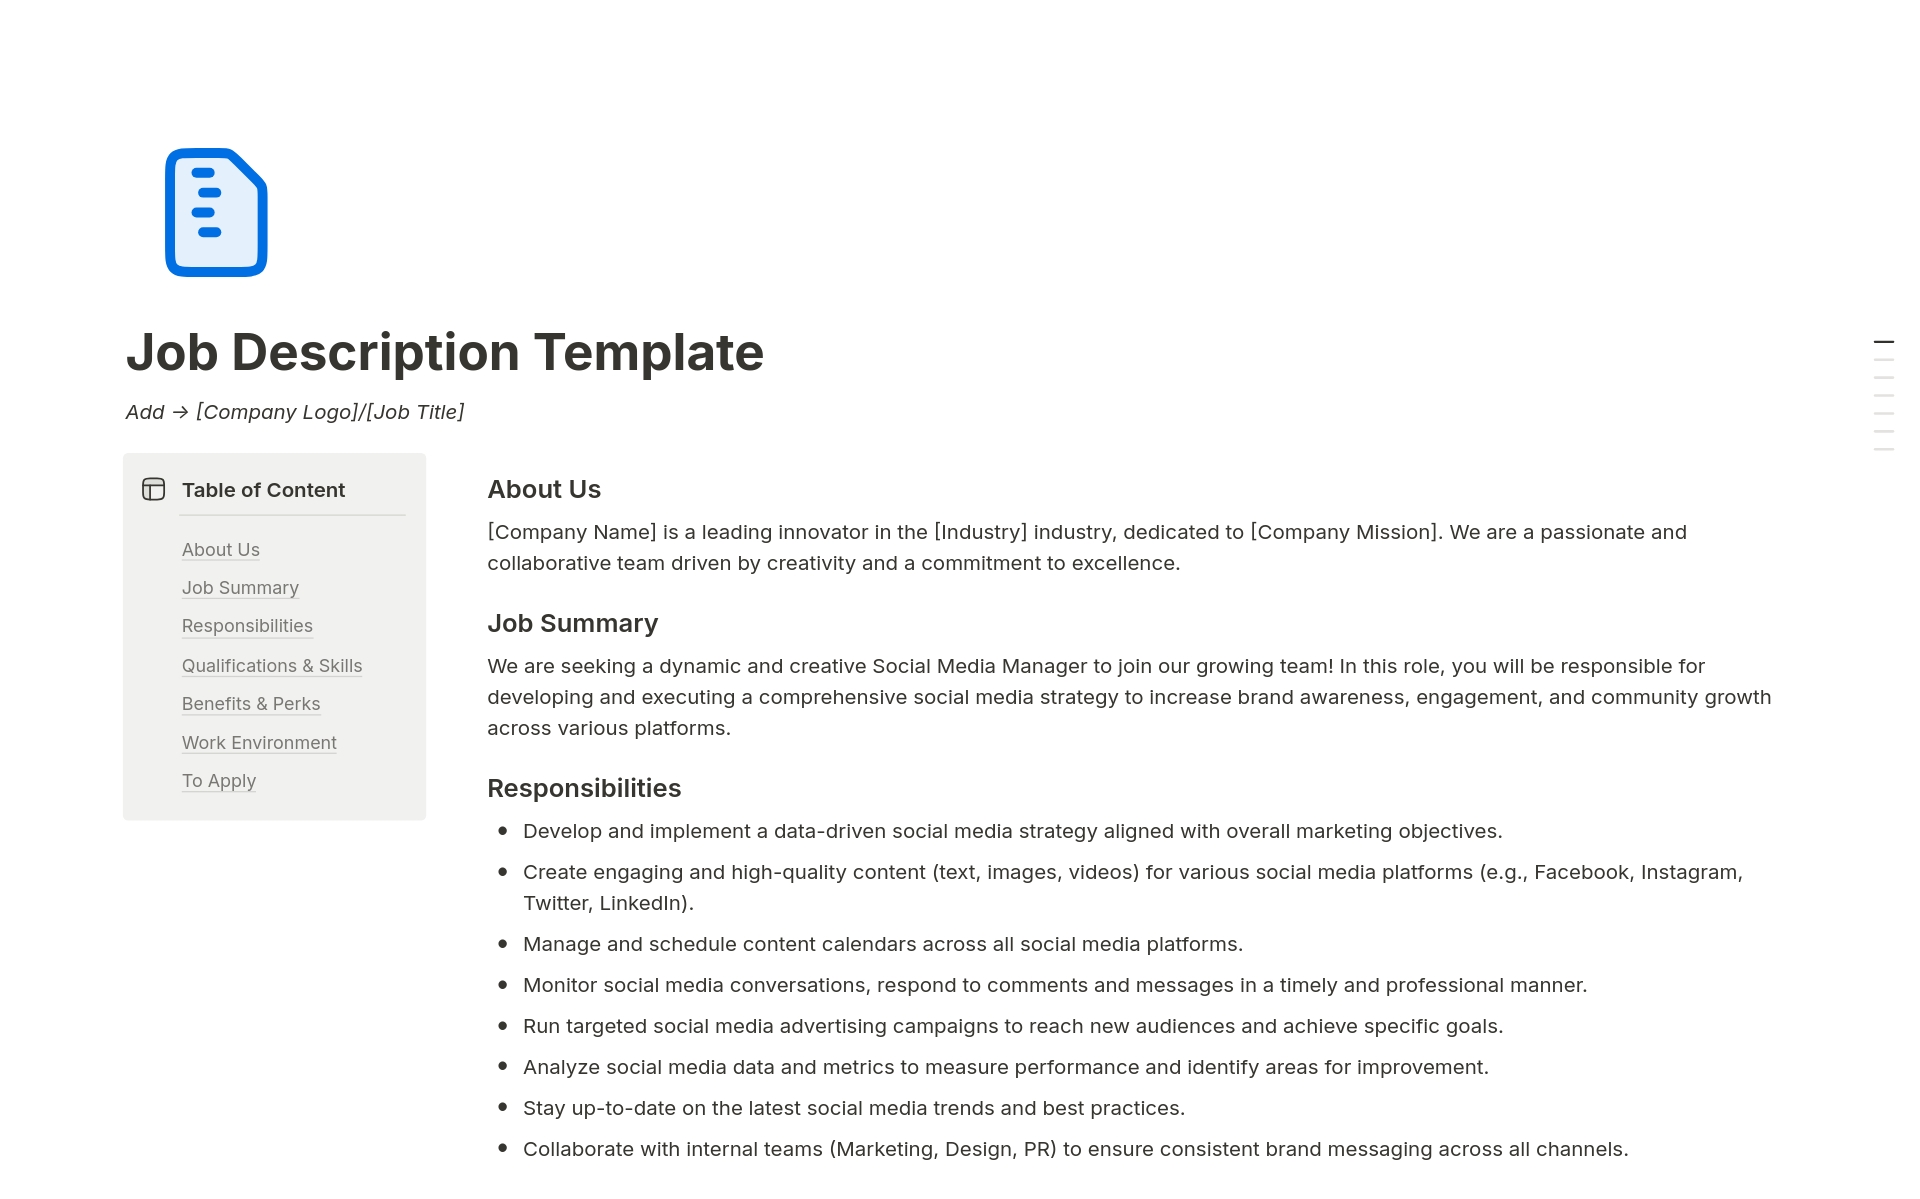 Streamline Your Hiring with the Easy-to-Customize Job Description Notion Template!